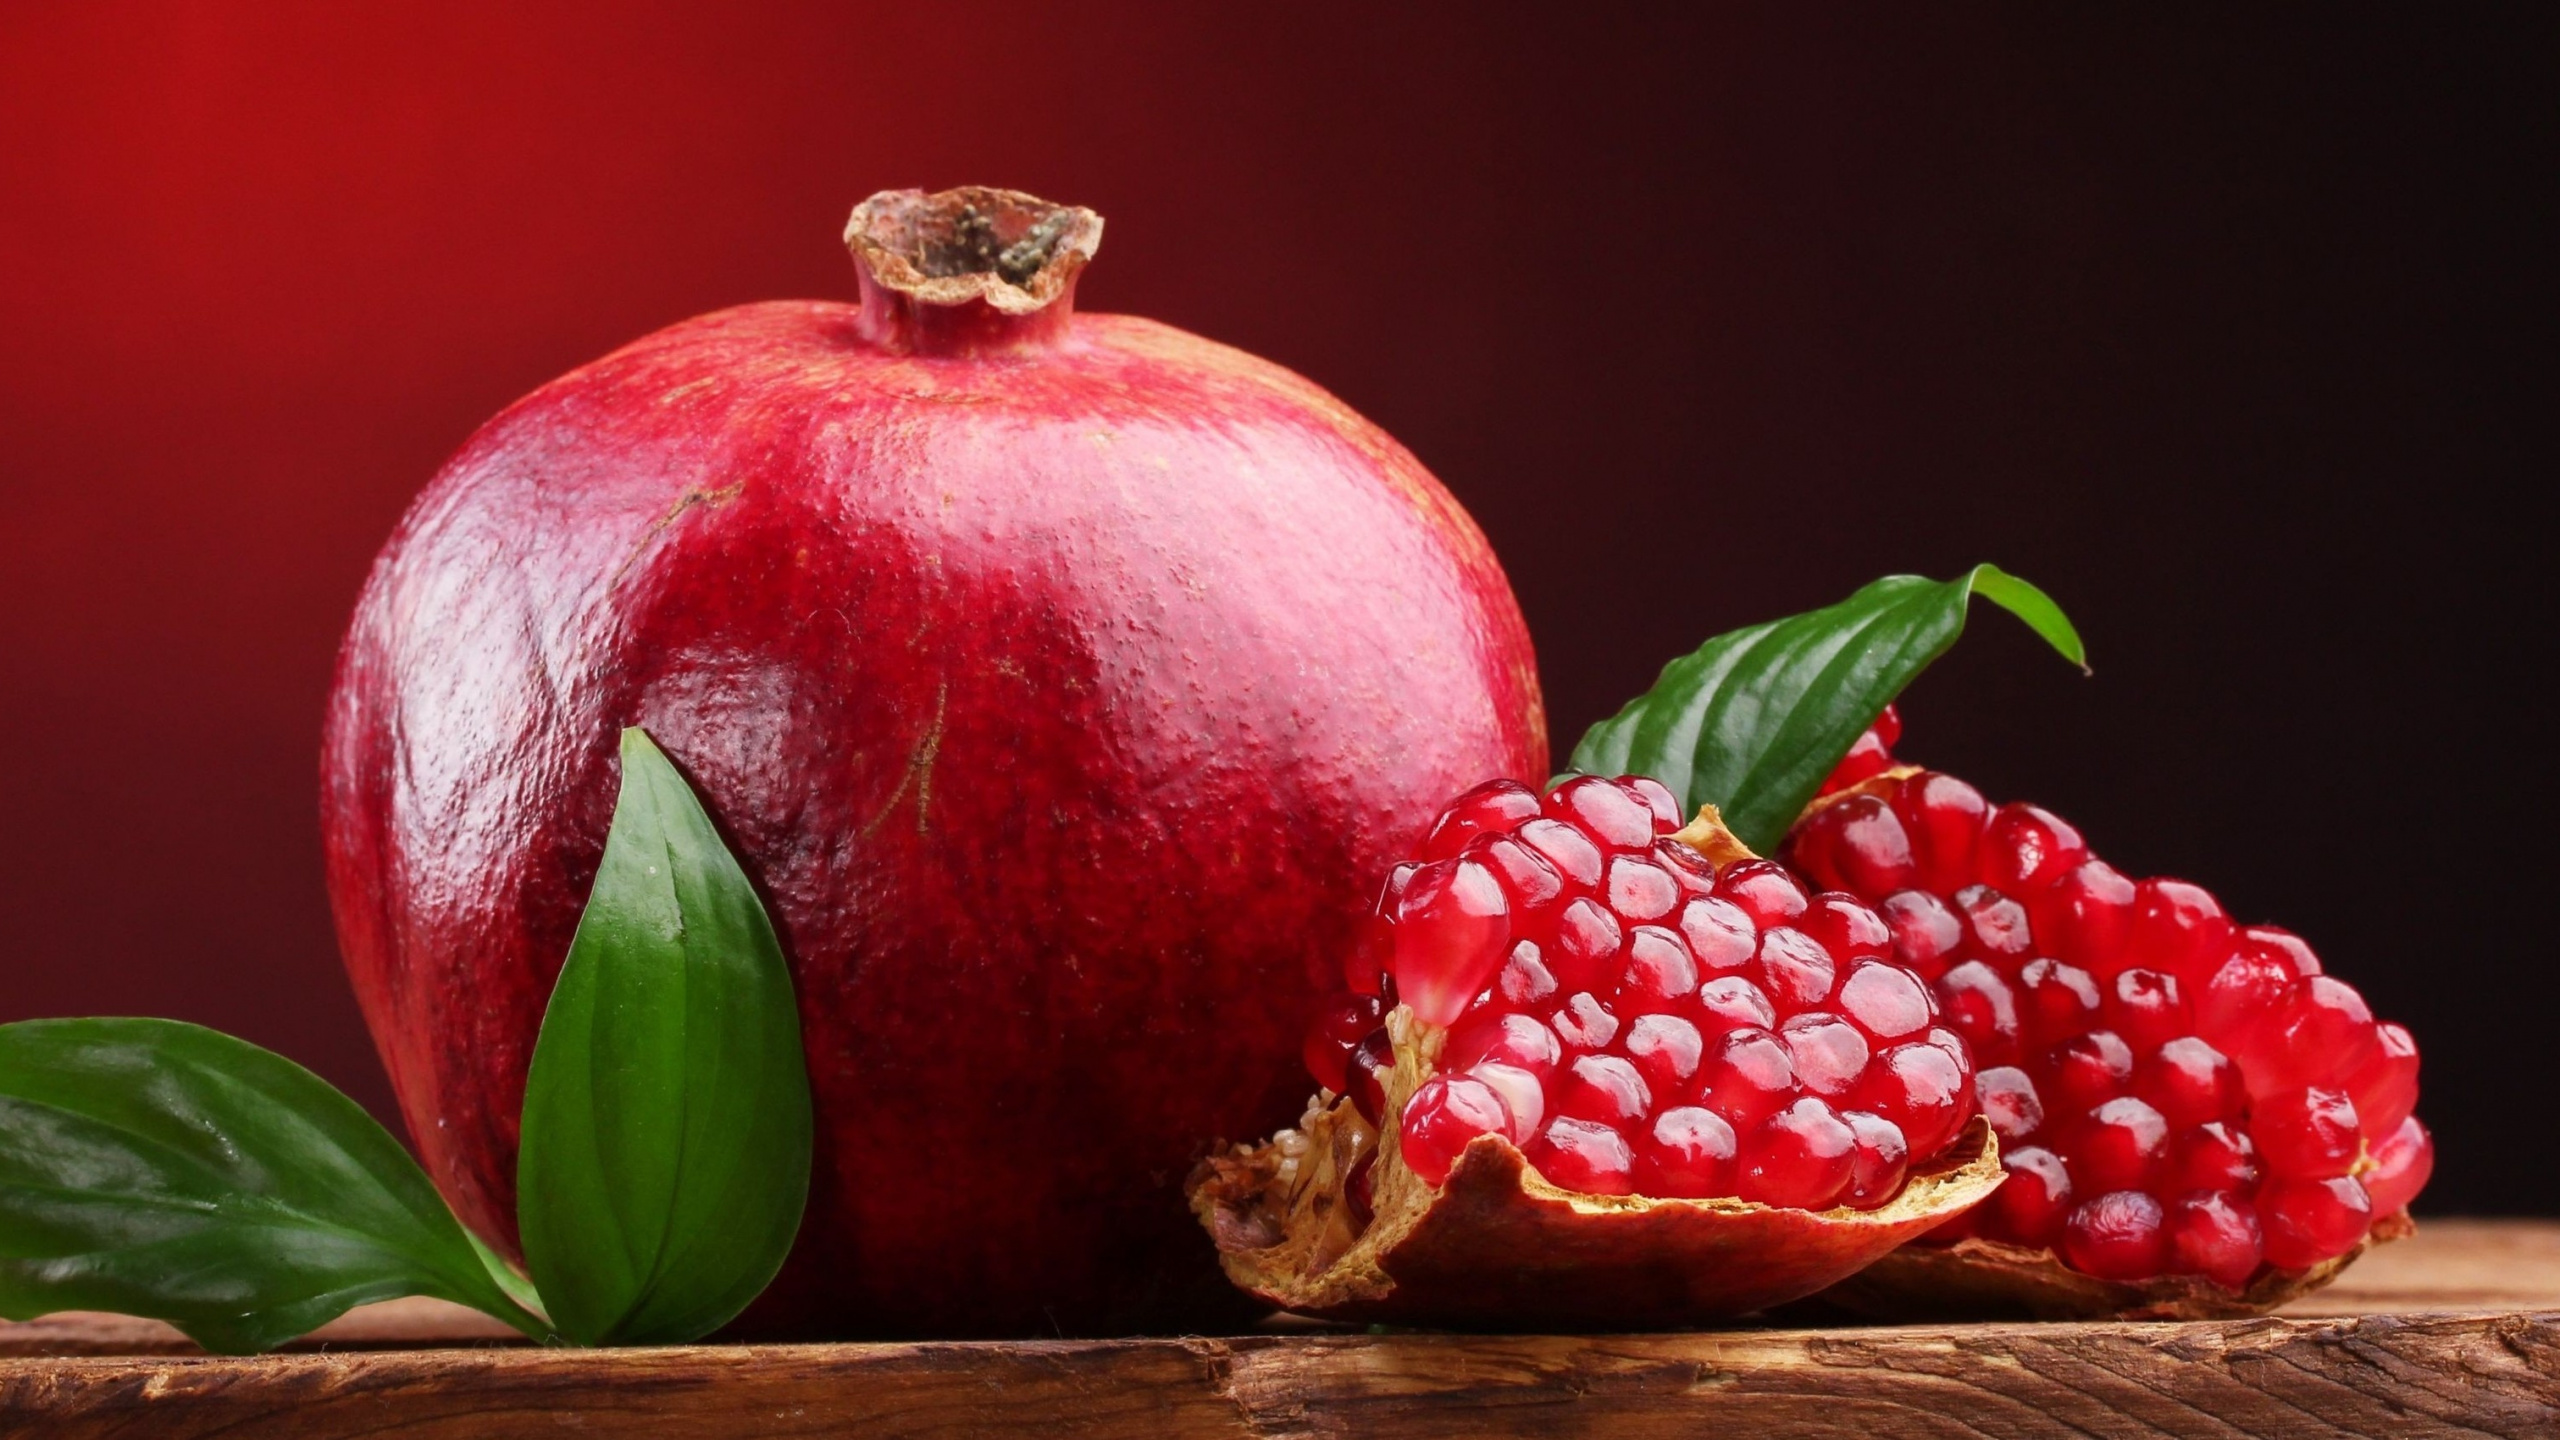 Red Fruit on Brown Wooden Table. Wallpaper in 2560x1440 Resolution